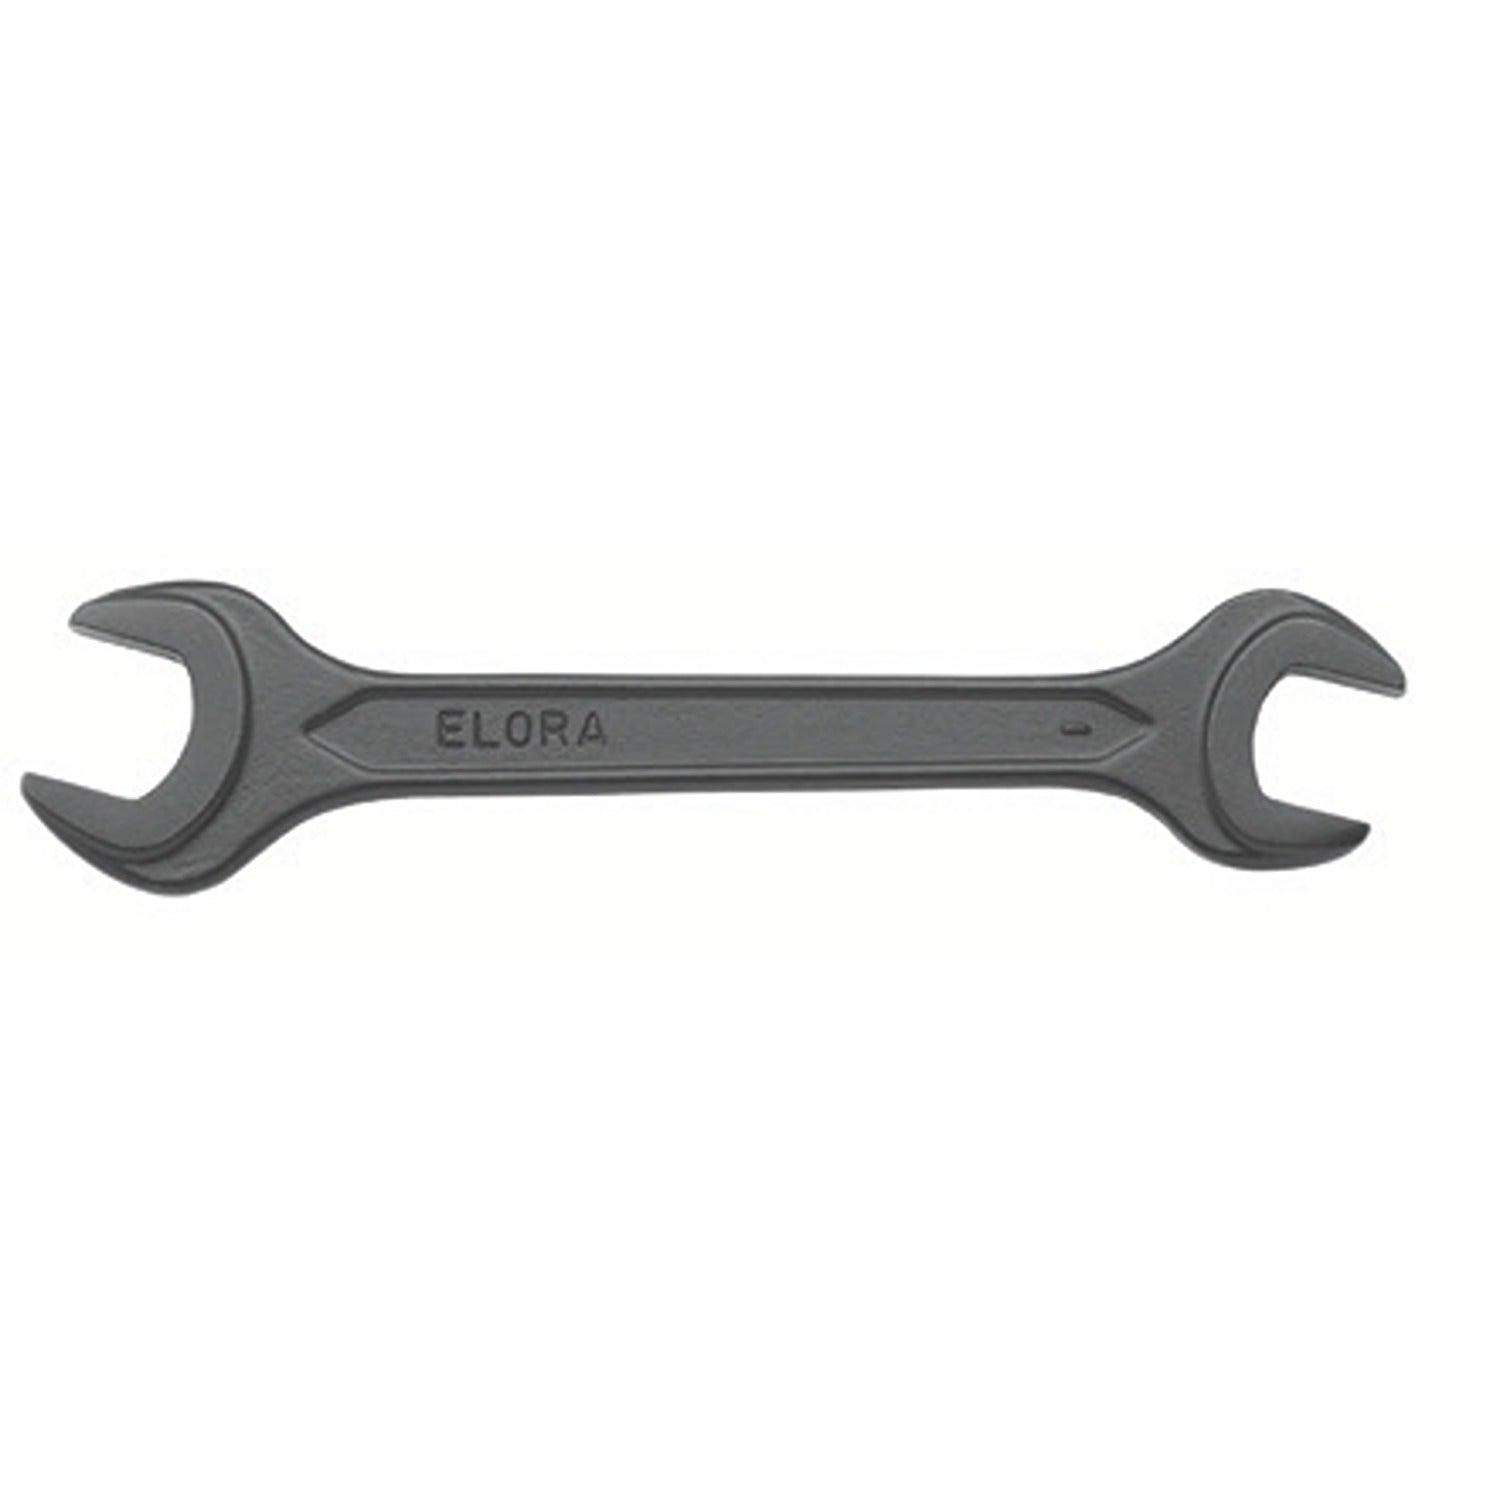 ELORA 895 Double Open Ended Spanner 580-665mm (ELORA Tools) - Premium Double Open Ended Spanner from ELORA - Shop now at Yew Aik.